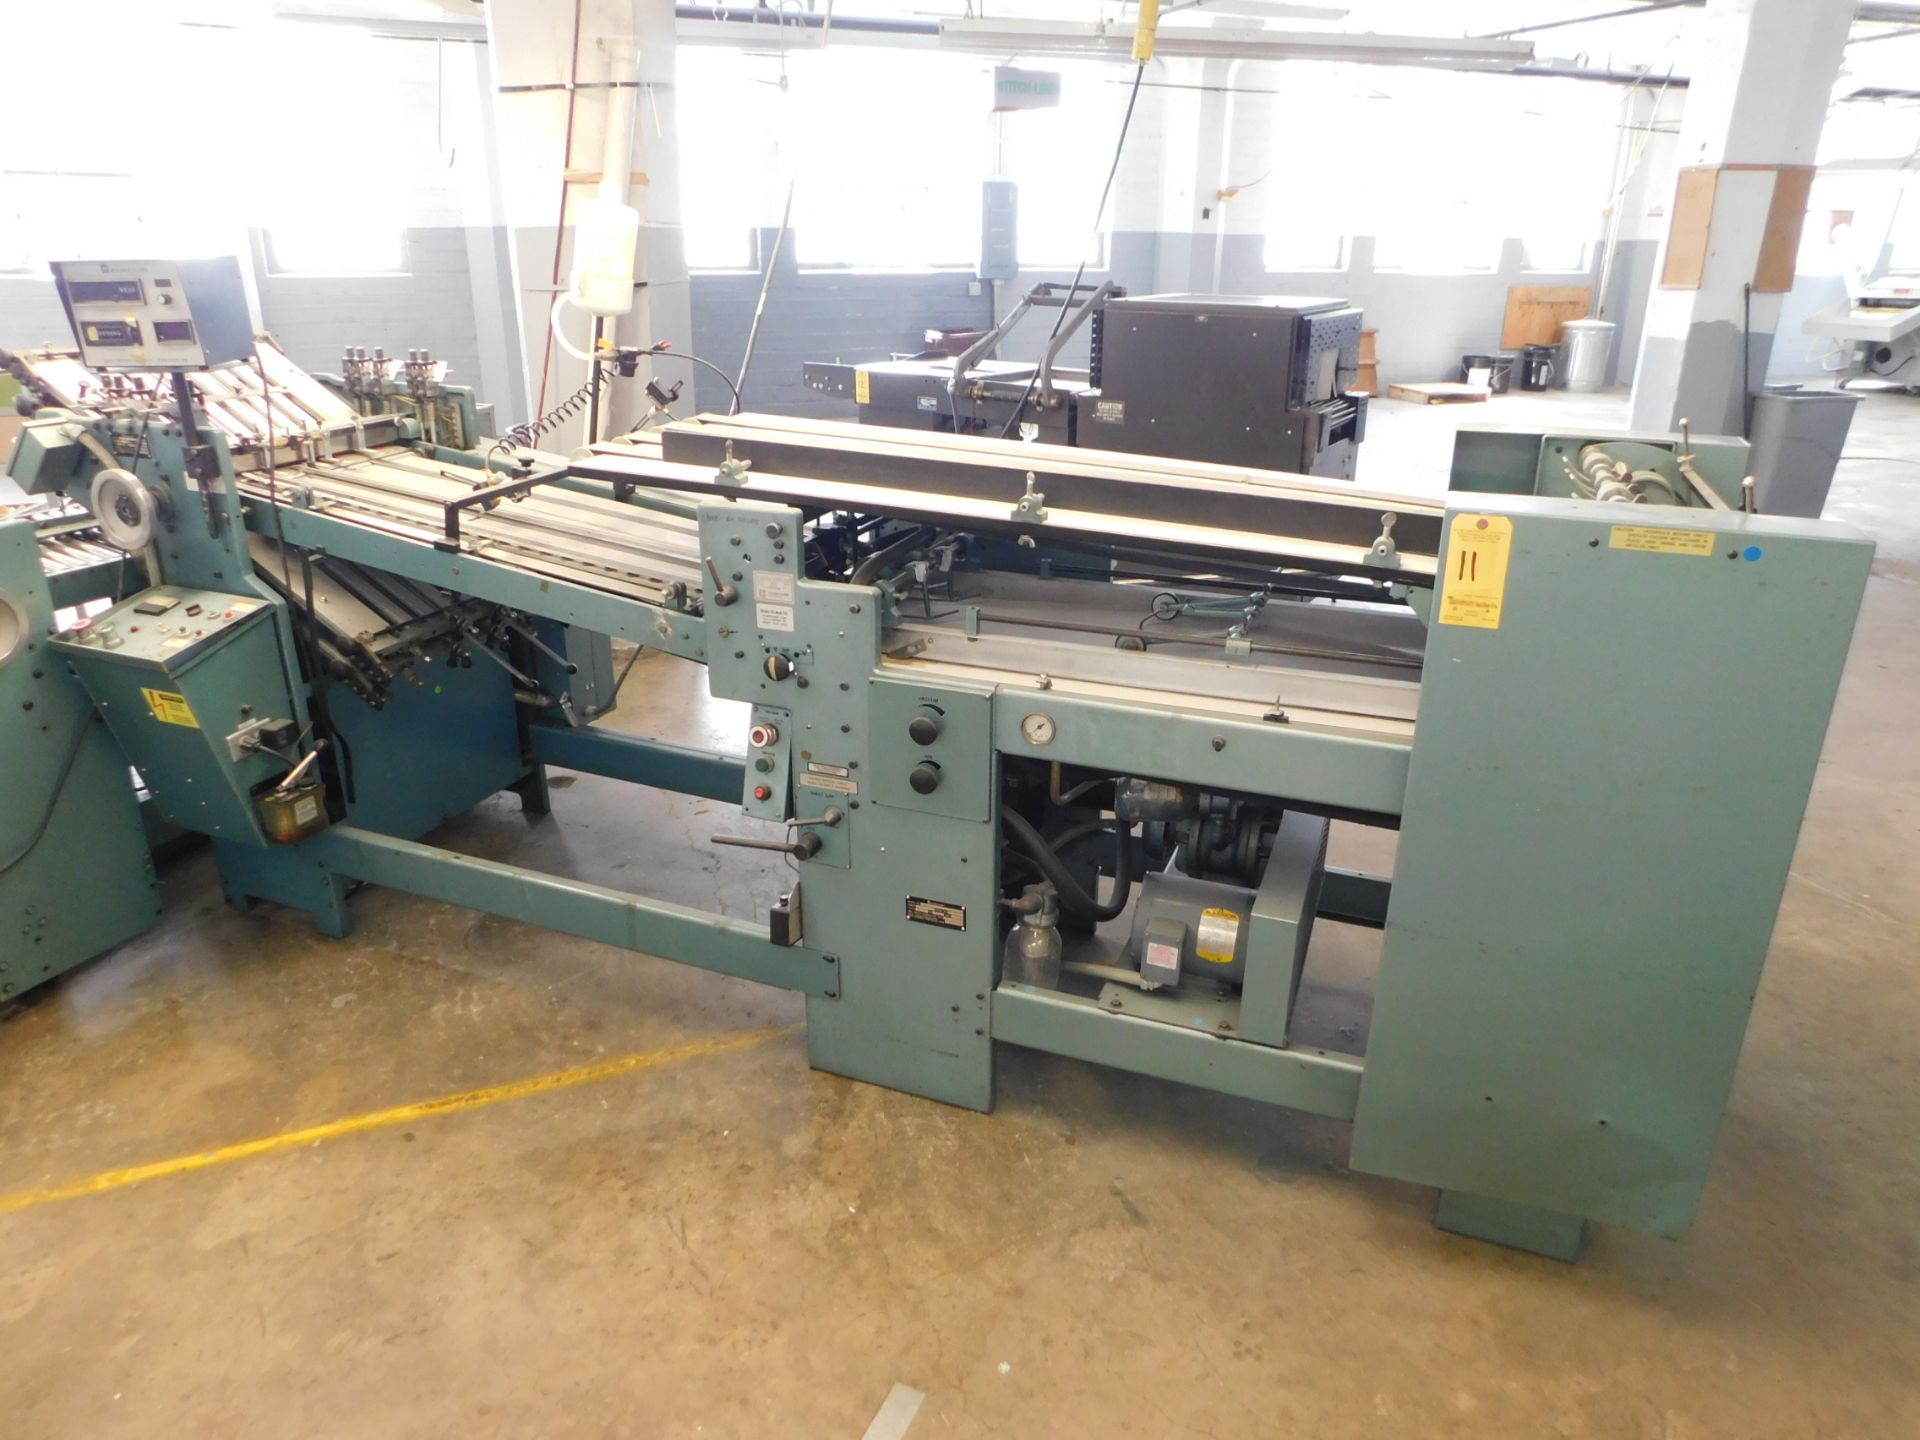 Baumfolder 720 - 20 x 26 700B folder with 8 page unit, includes 700B - 20 x 20 8pp folding unit with - Image 2 of 7